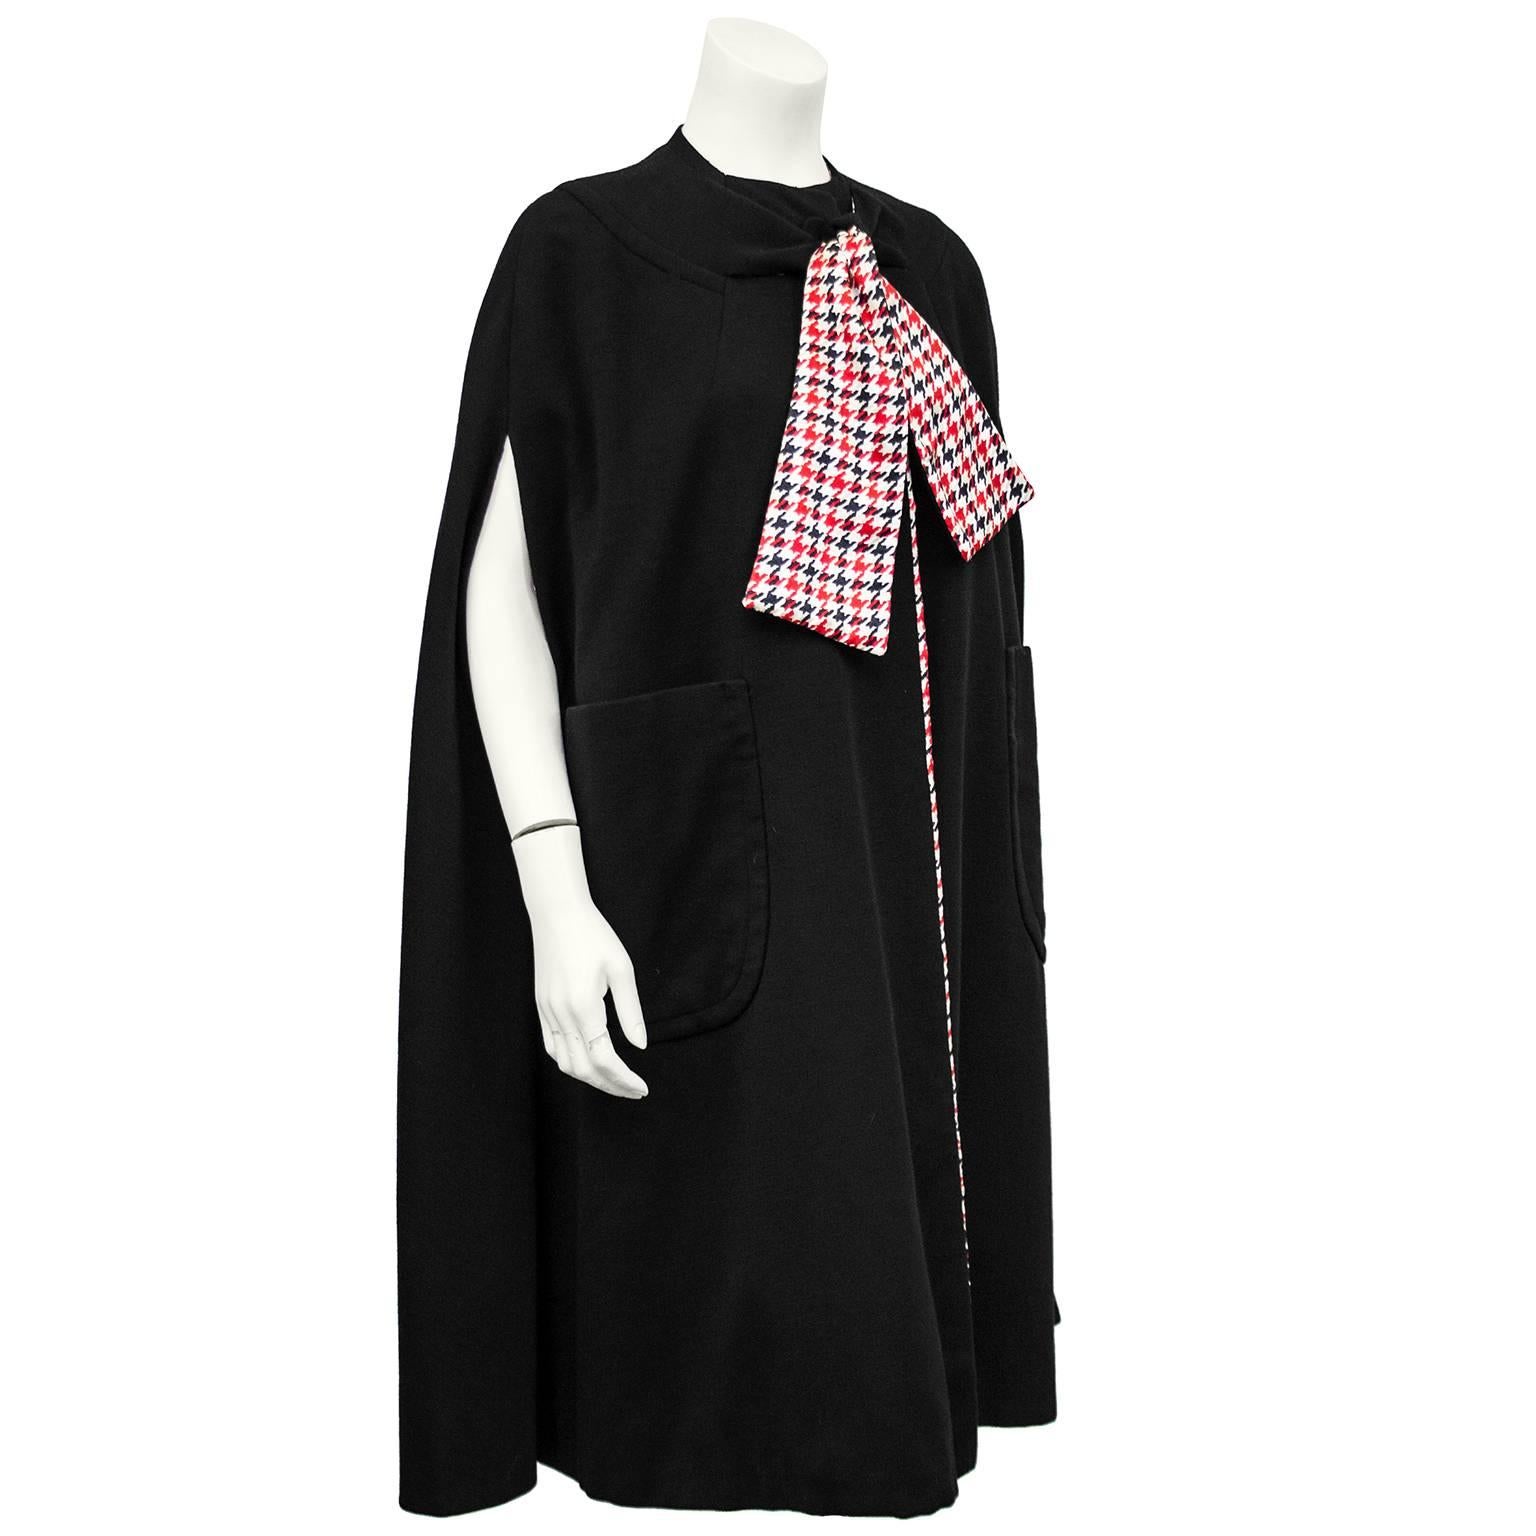 1960s Pauline Trigere black wool jersey cape. Red, black and cream houndstooth silk lining for a pop of colour. Large pussy bow tie at neck with black on one side and houndstooth lining on the other - when tied the houndstooth faces out. Adorable